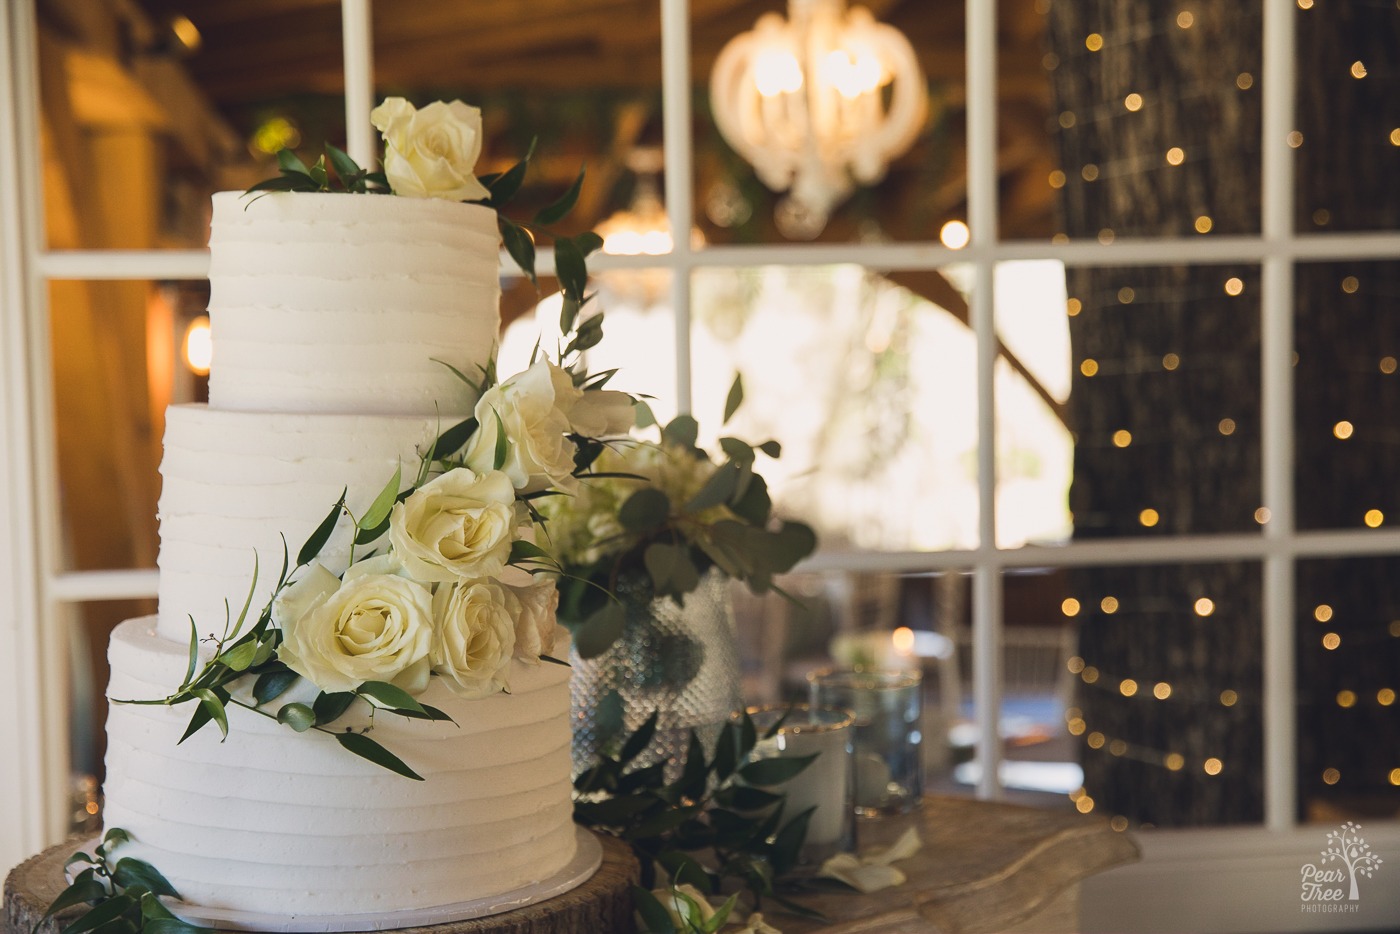 Three layer wedding cake with white roses wrapped around it and twinkle lights in the background